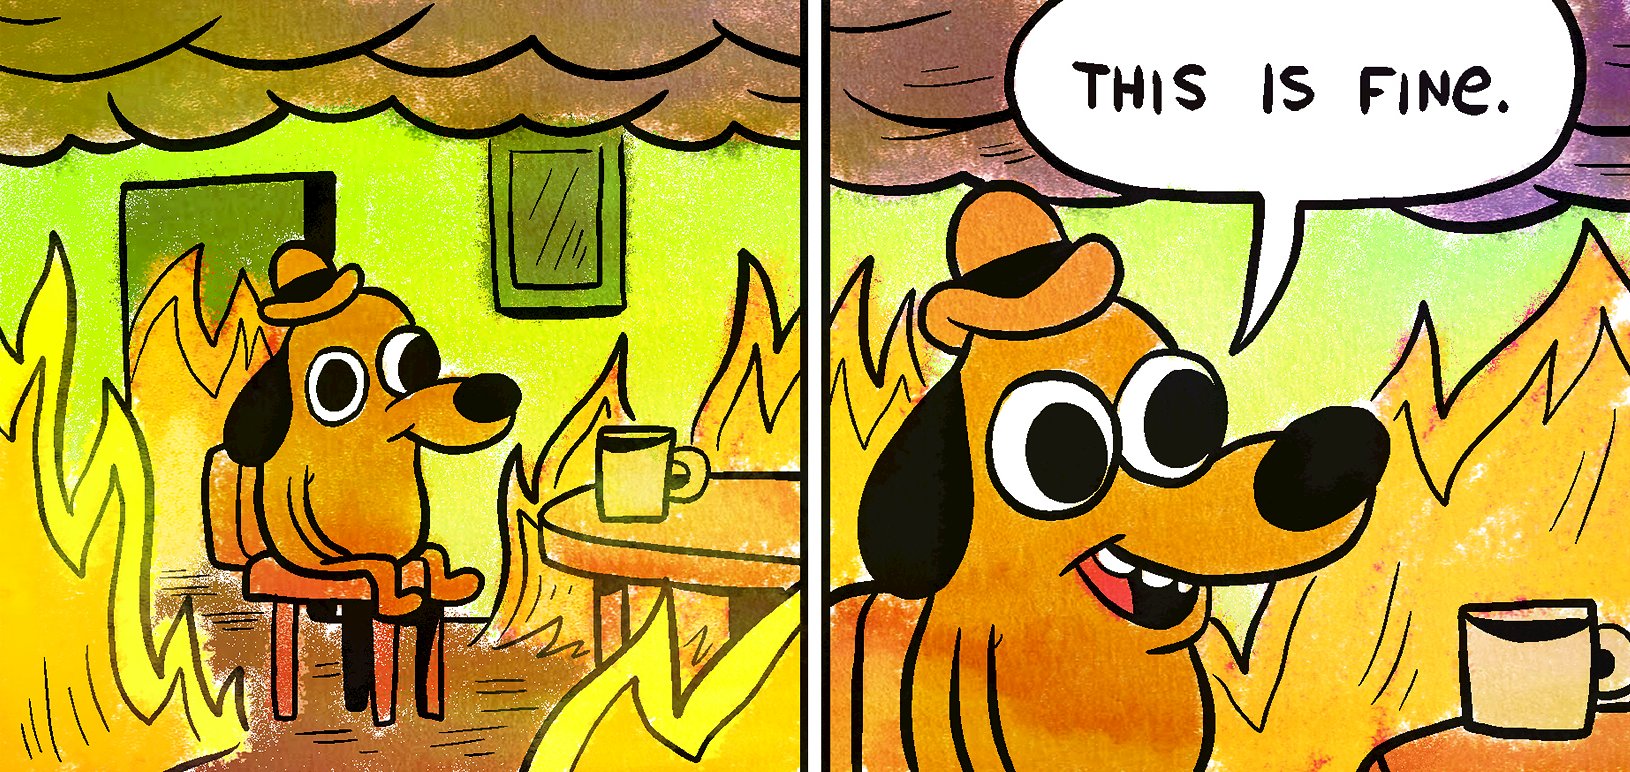 This is fine image